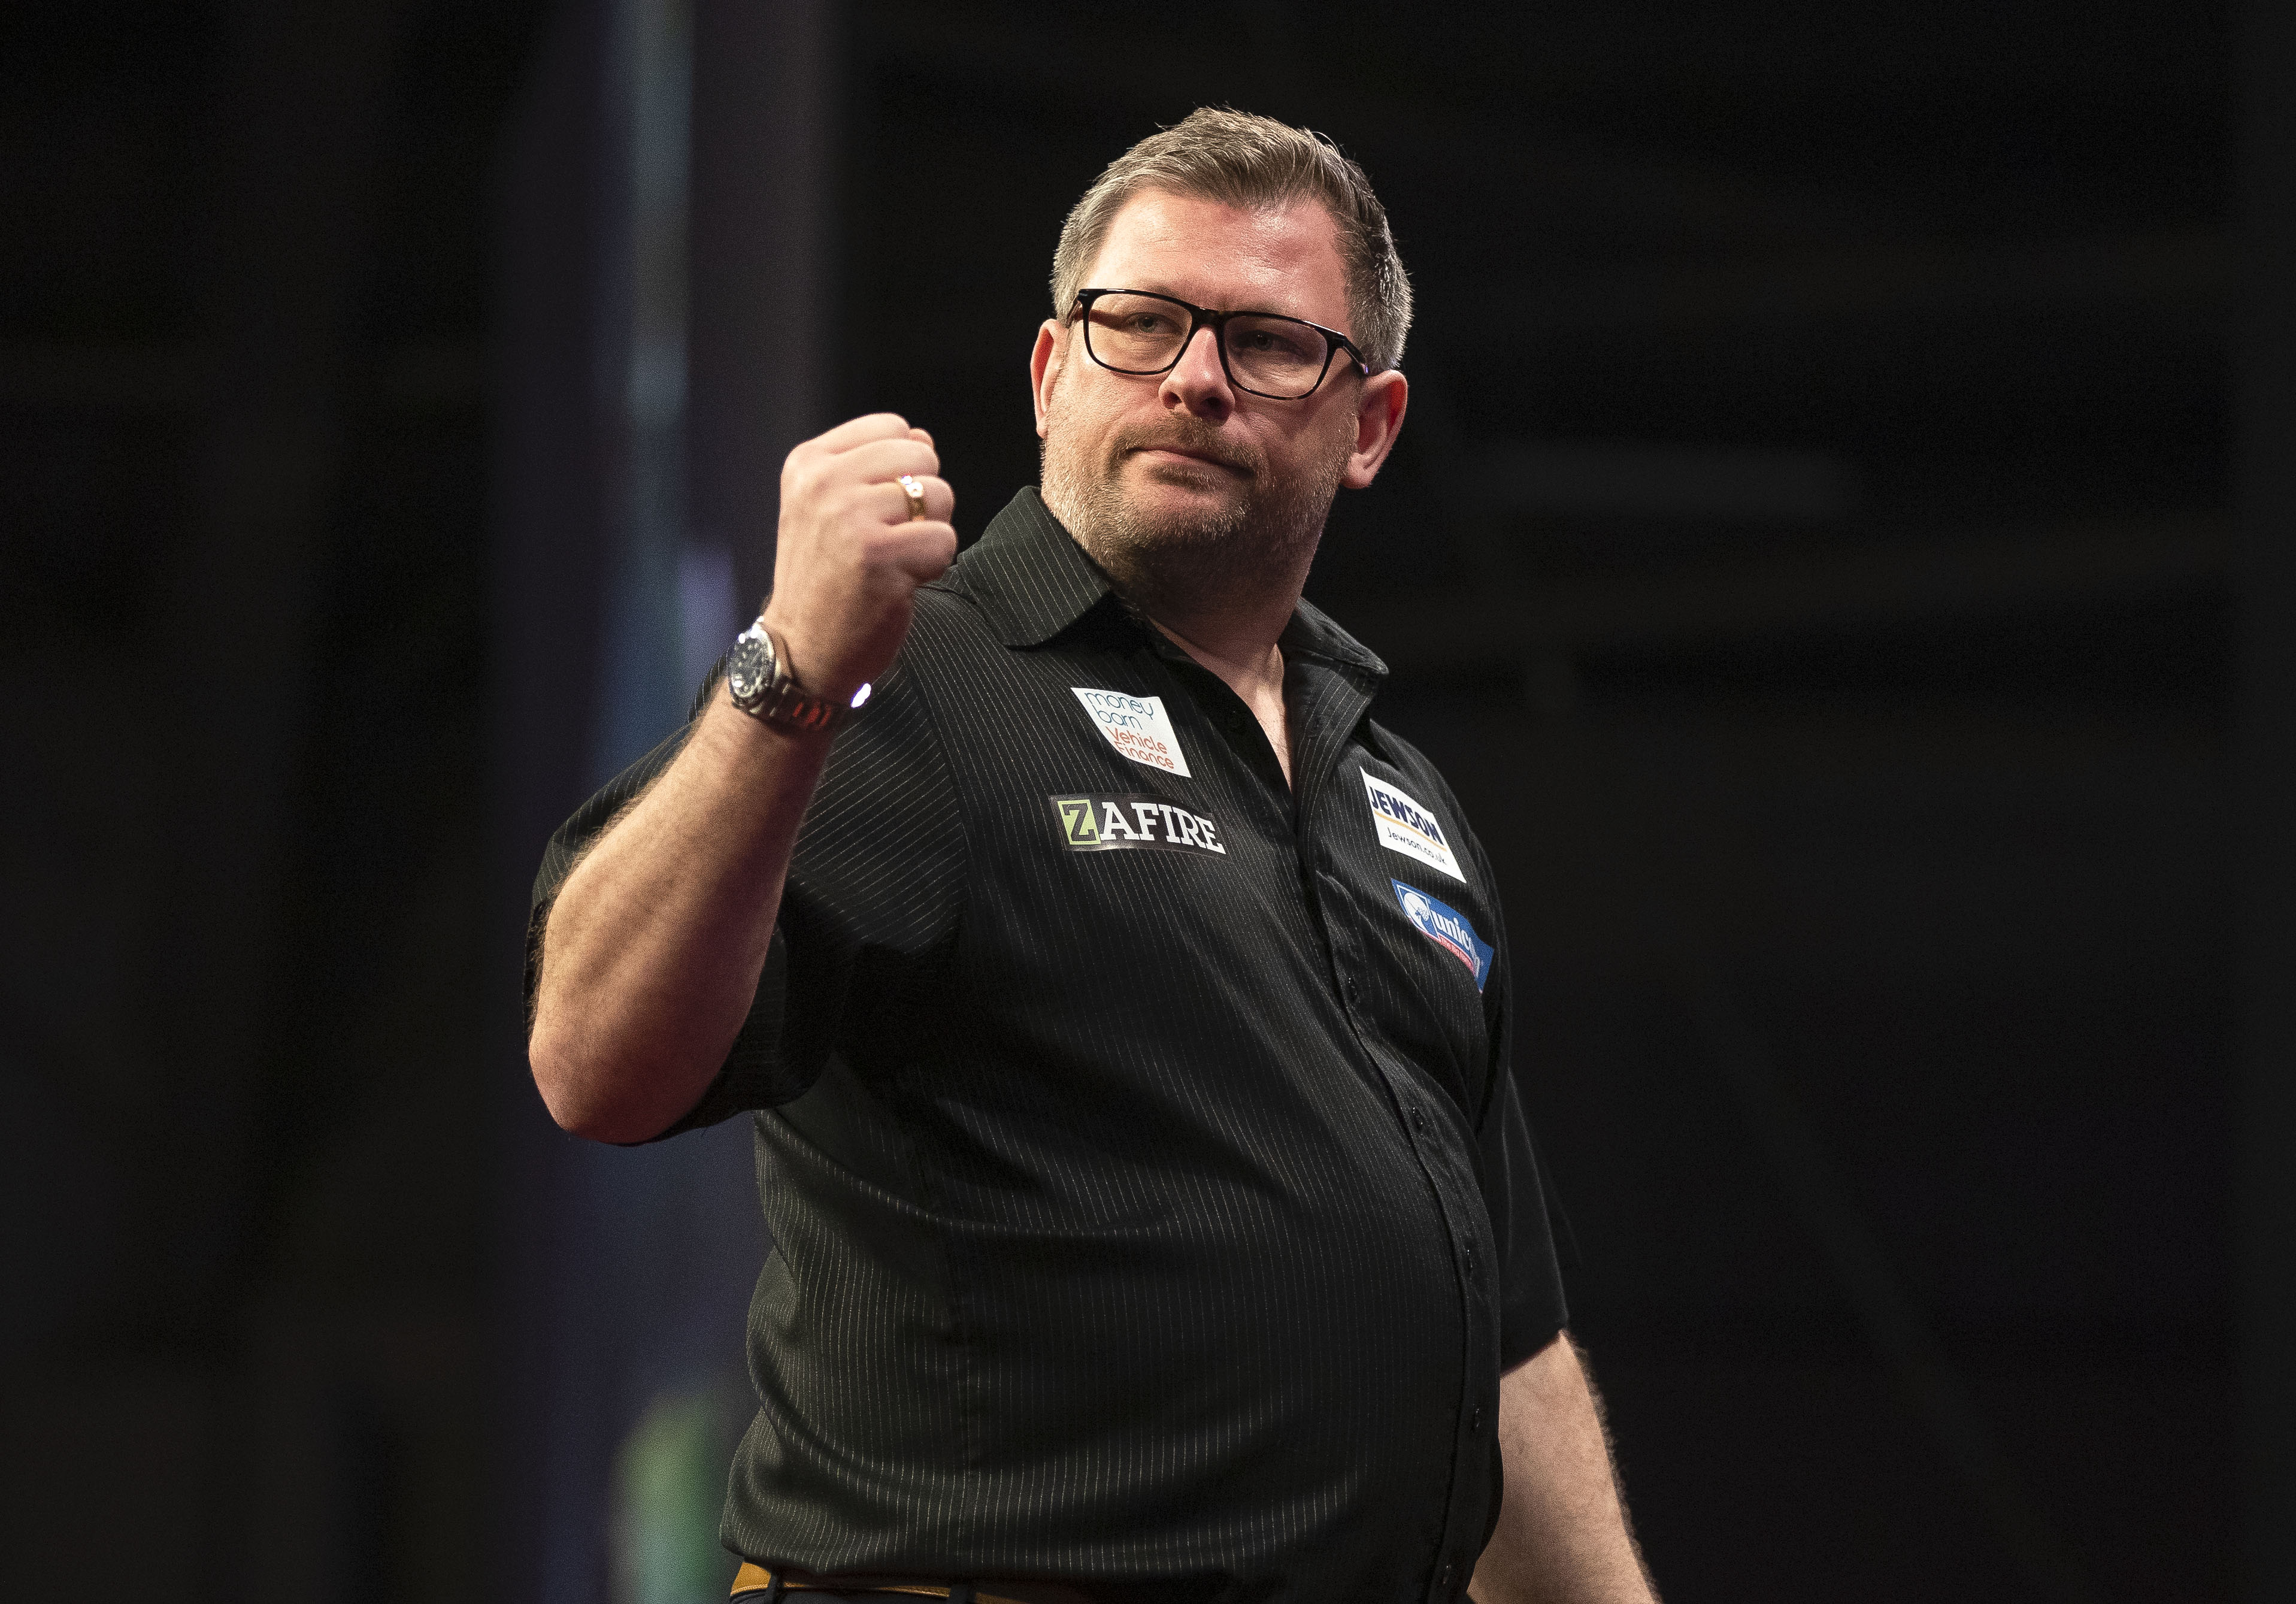 Wade close to his best after Manchester glory...